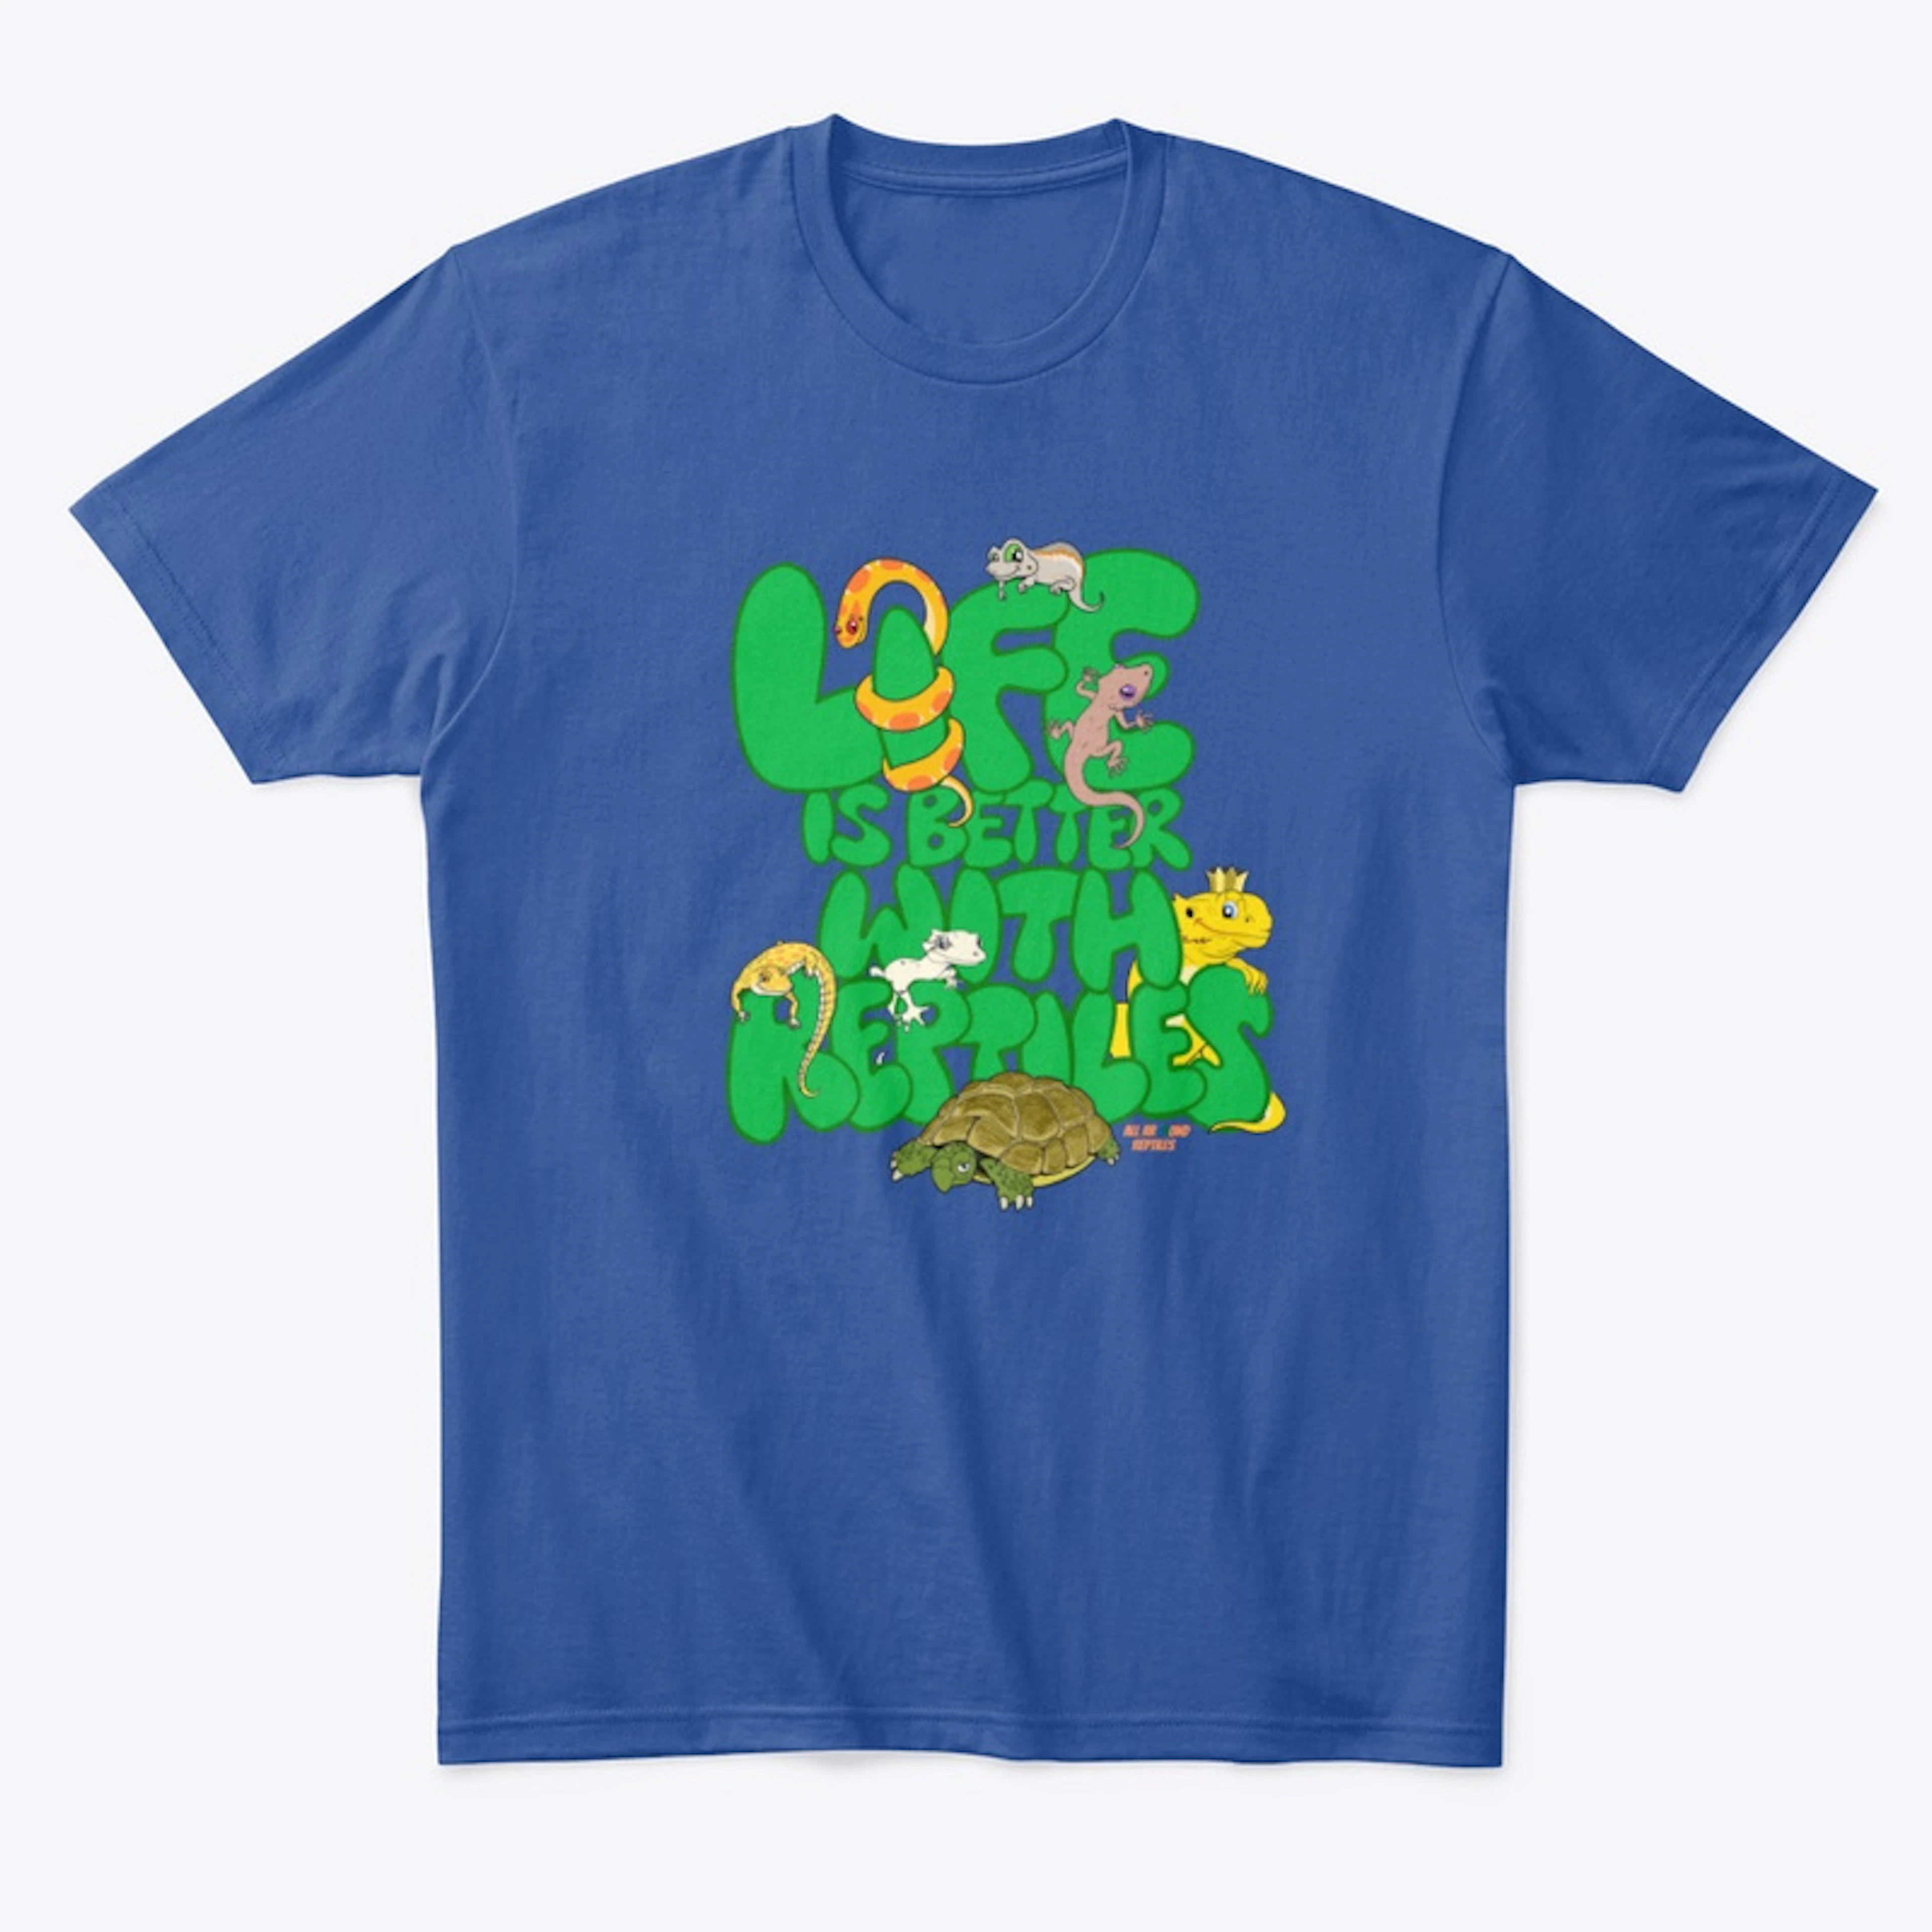 Life is better with reptiles - Tee